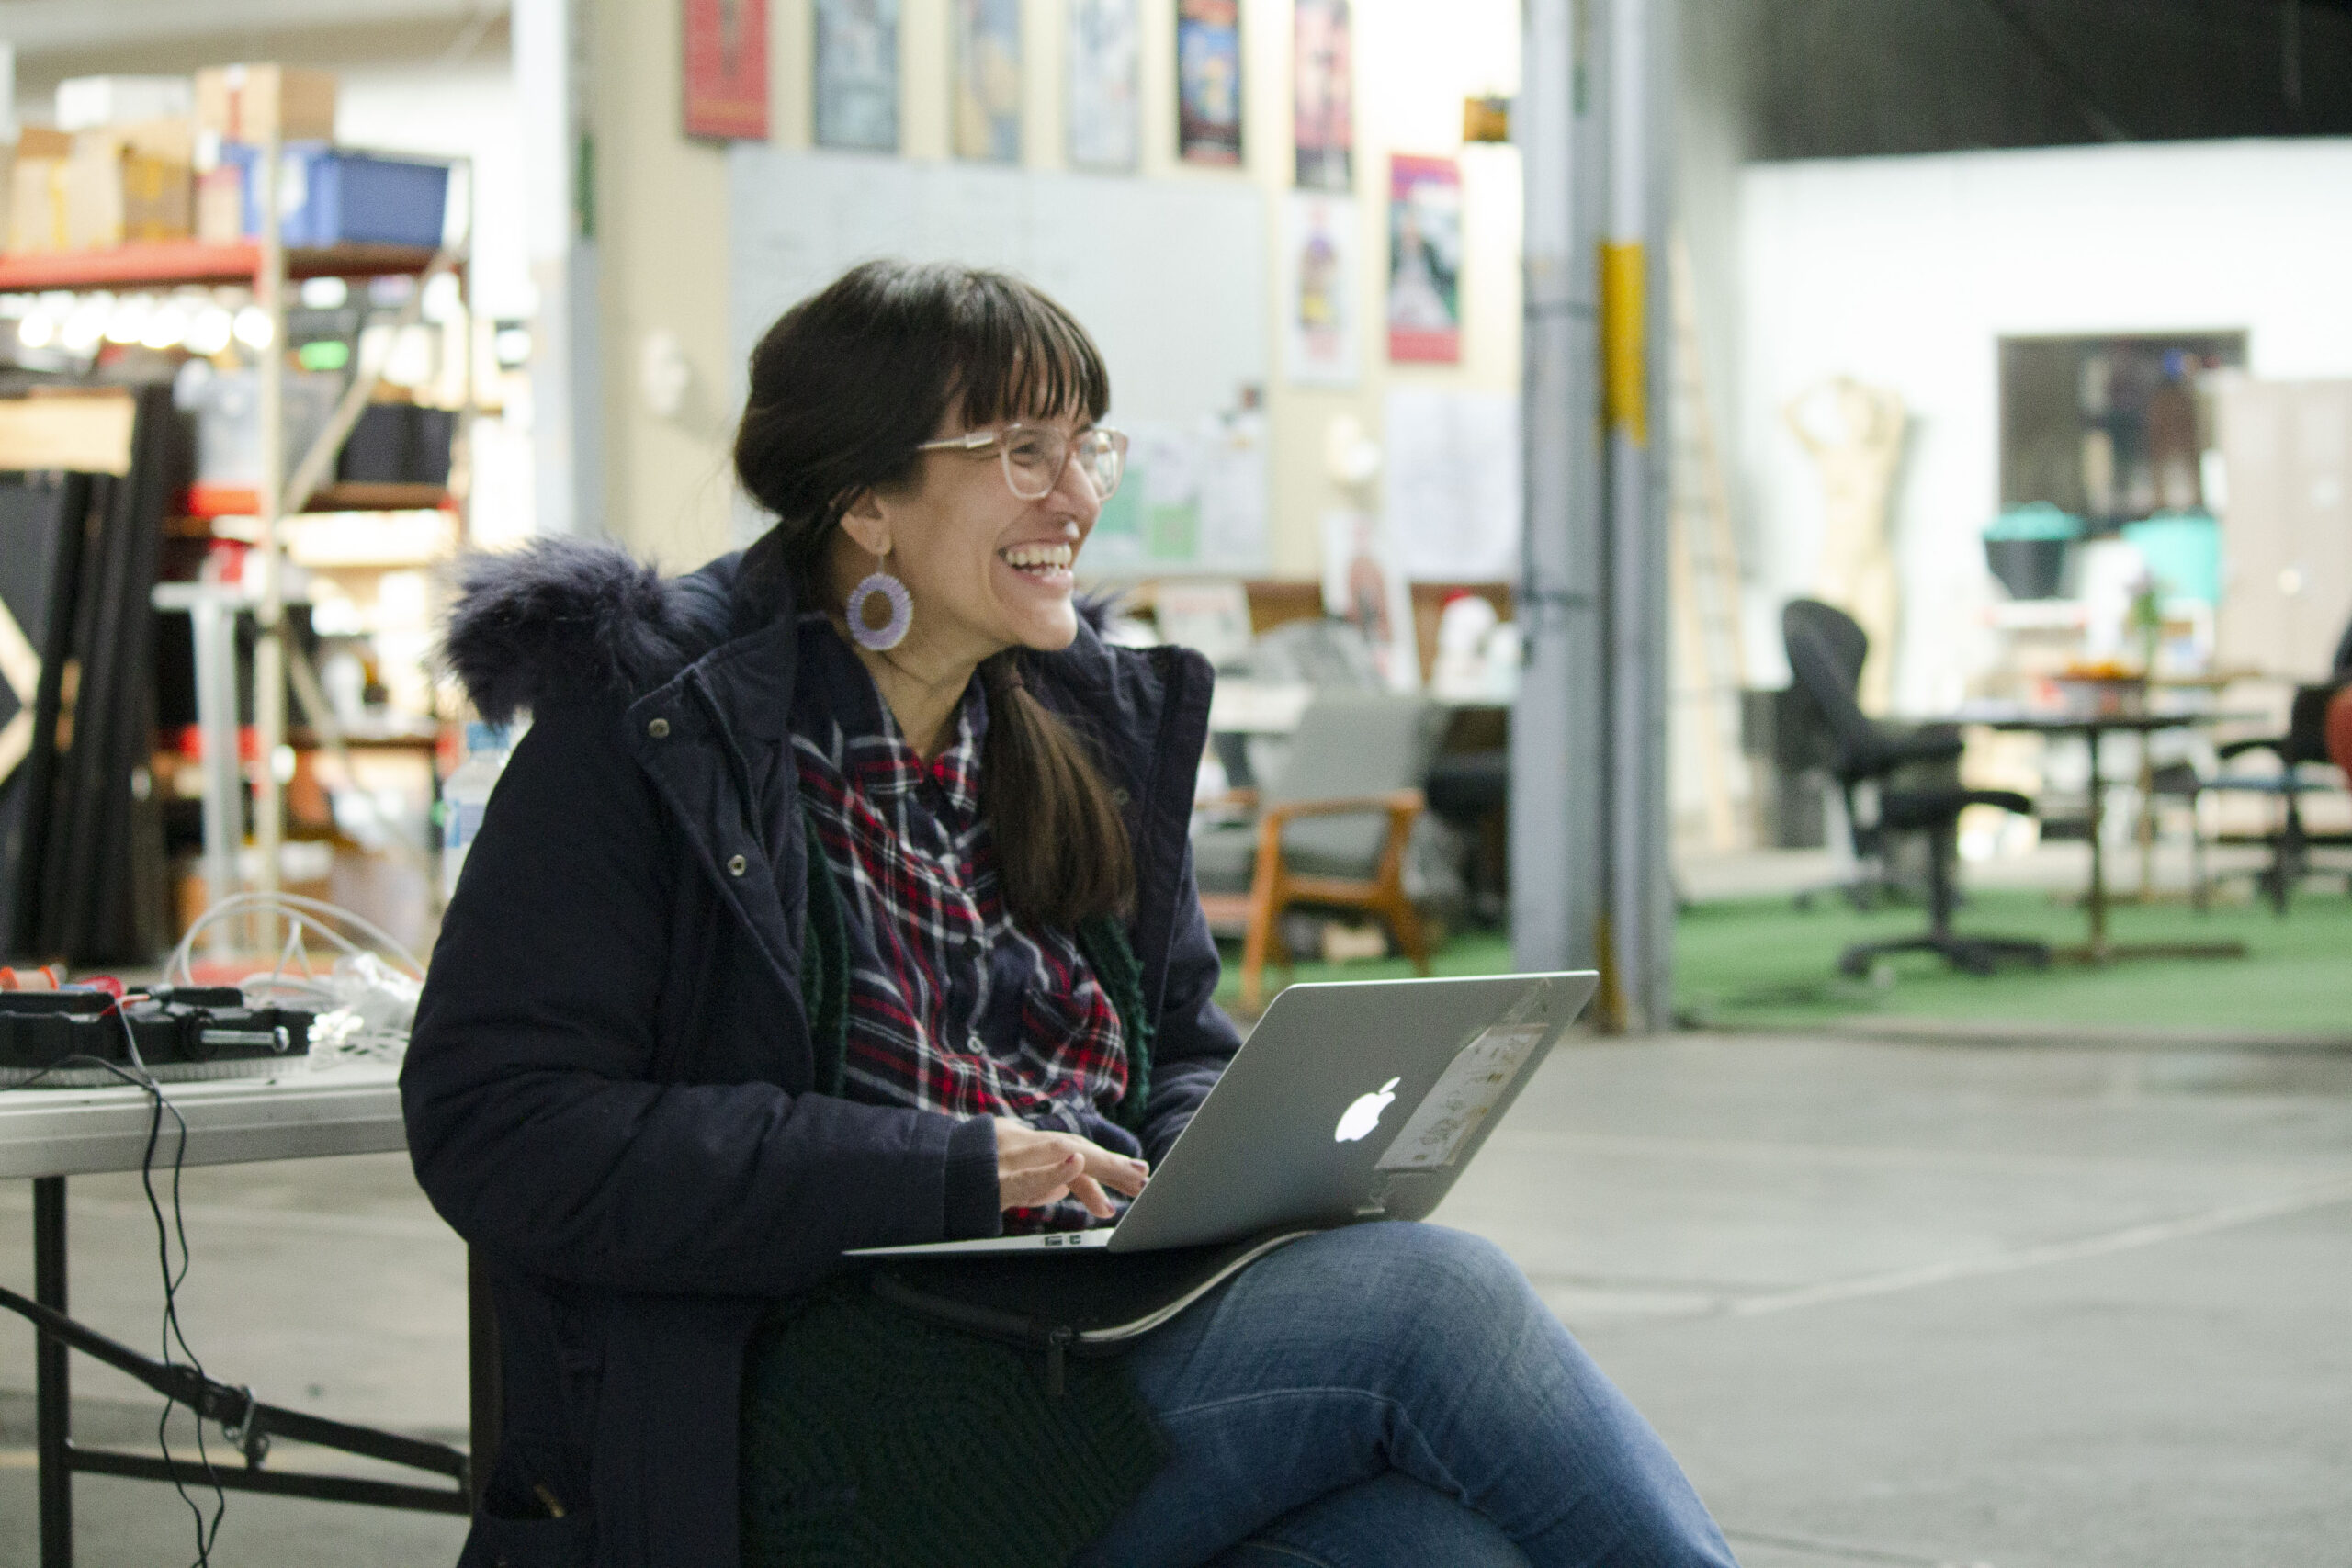 A photo of Yasmin Gurreeboo sitting, with laptop in a backstage theatre lot area, looking happy and productive at work